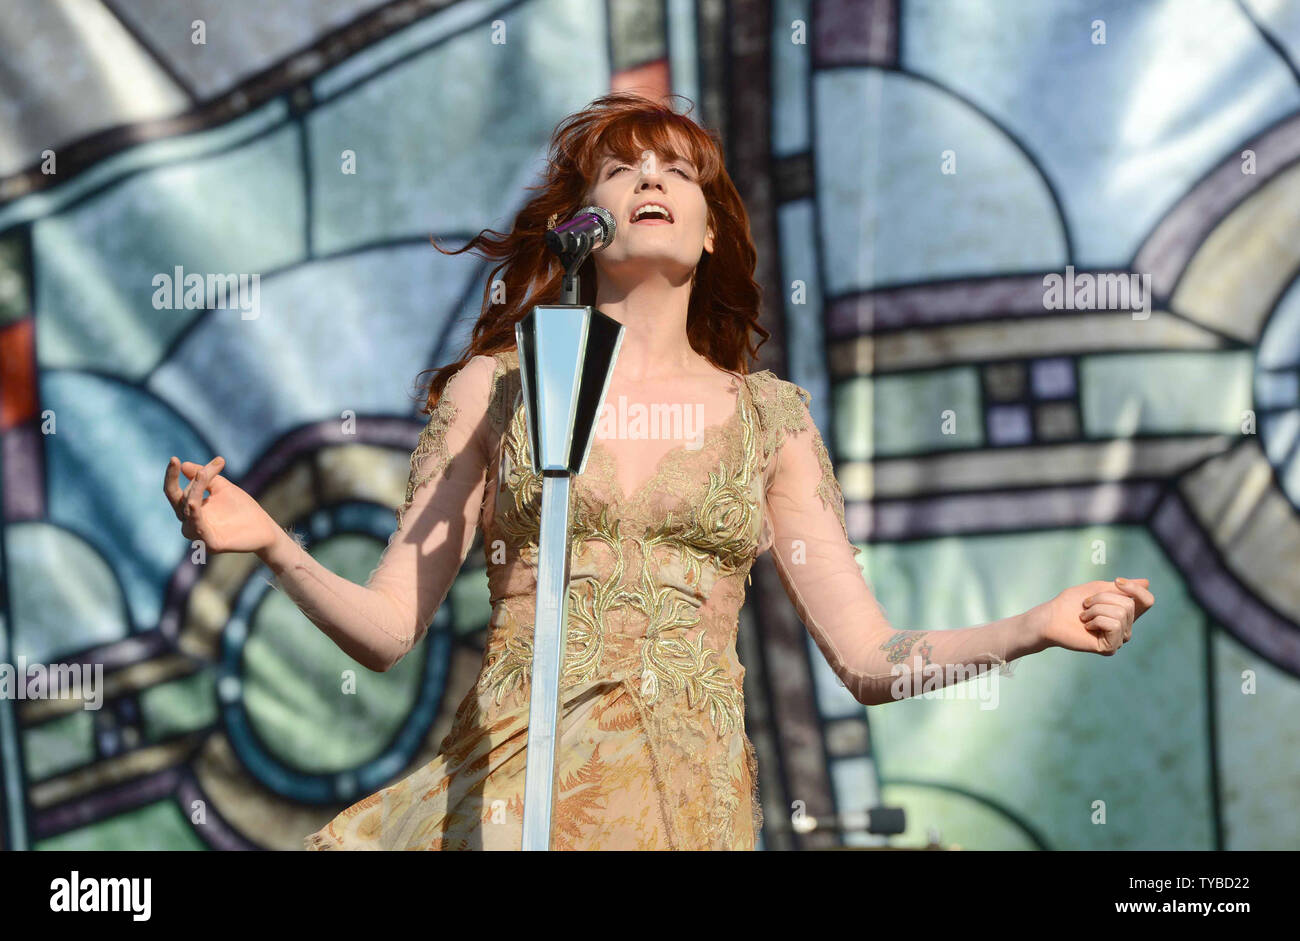 Florence Welch from Florence and the Machine performs live during the BBC Radio  1 Hackney Weekend 2012 at Hackney Marshes in London on June 24, 2012.  UPI/Paul Treadway Stock Photo - Alamy